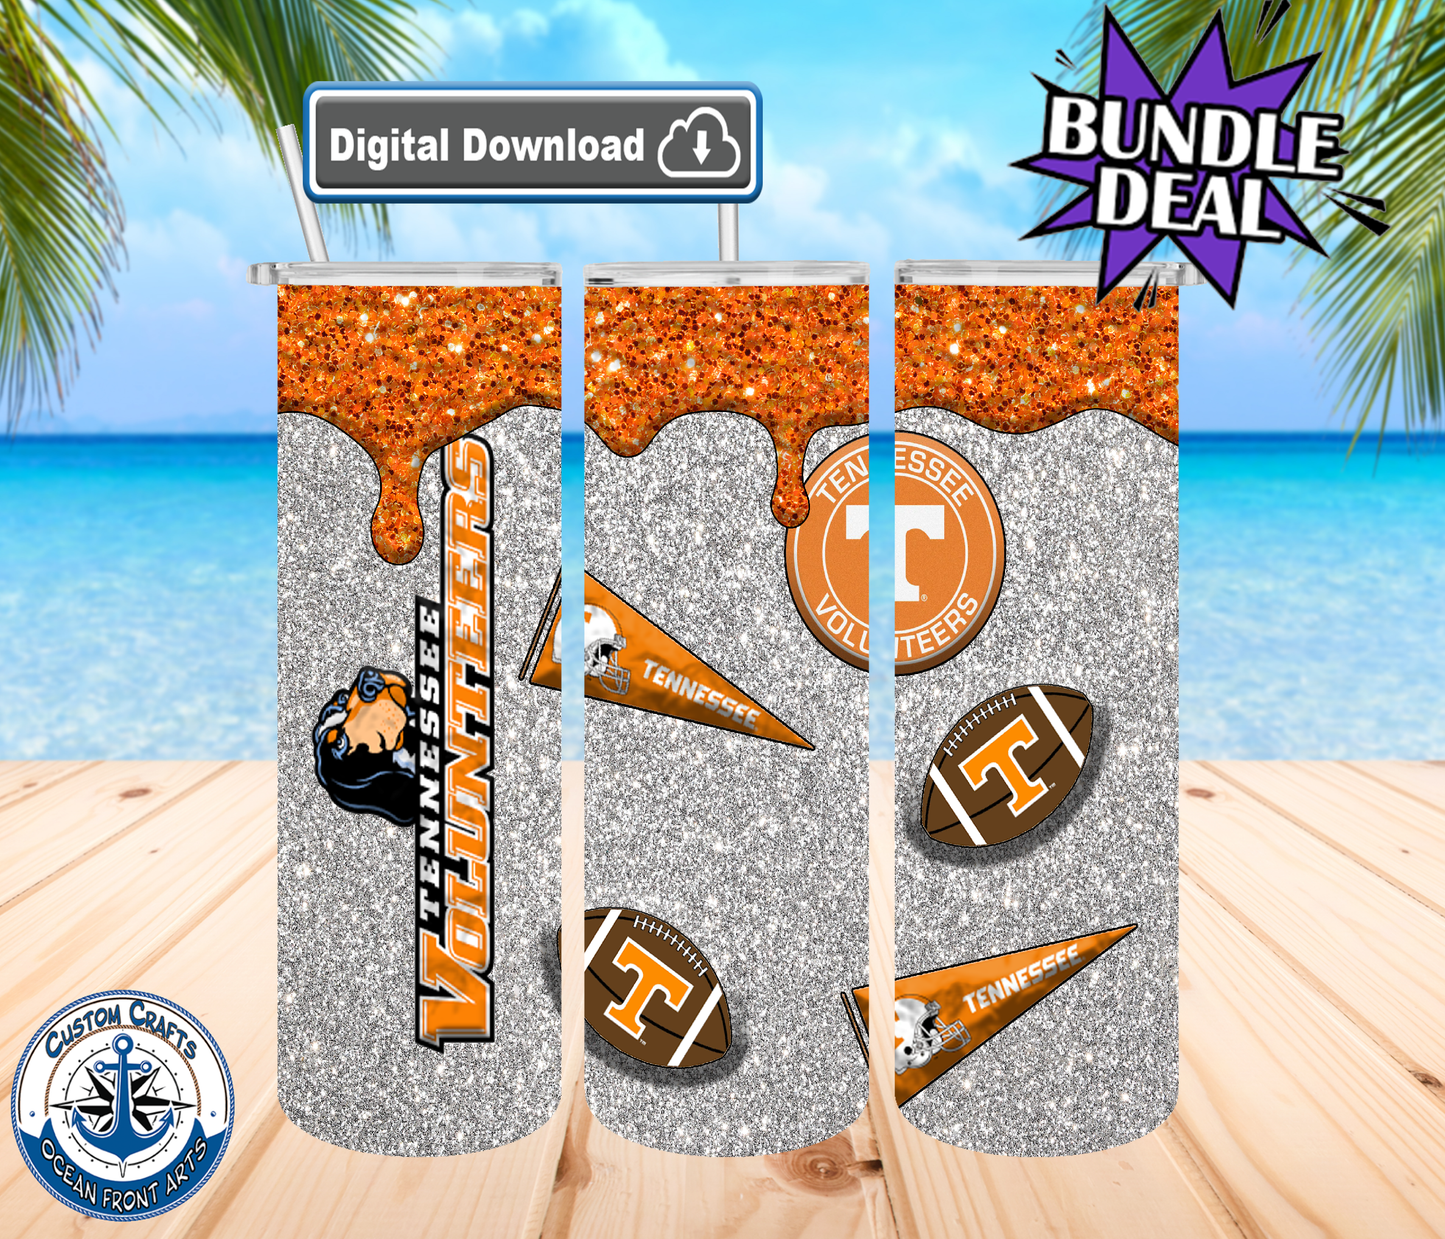 Tennesse tumbler designs bundle of 6 images 300dpi high quality png files instant downloads